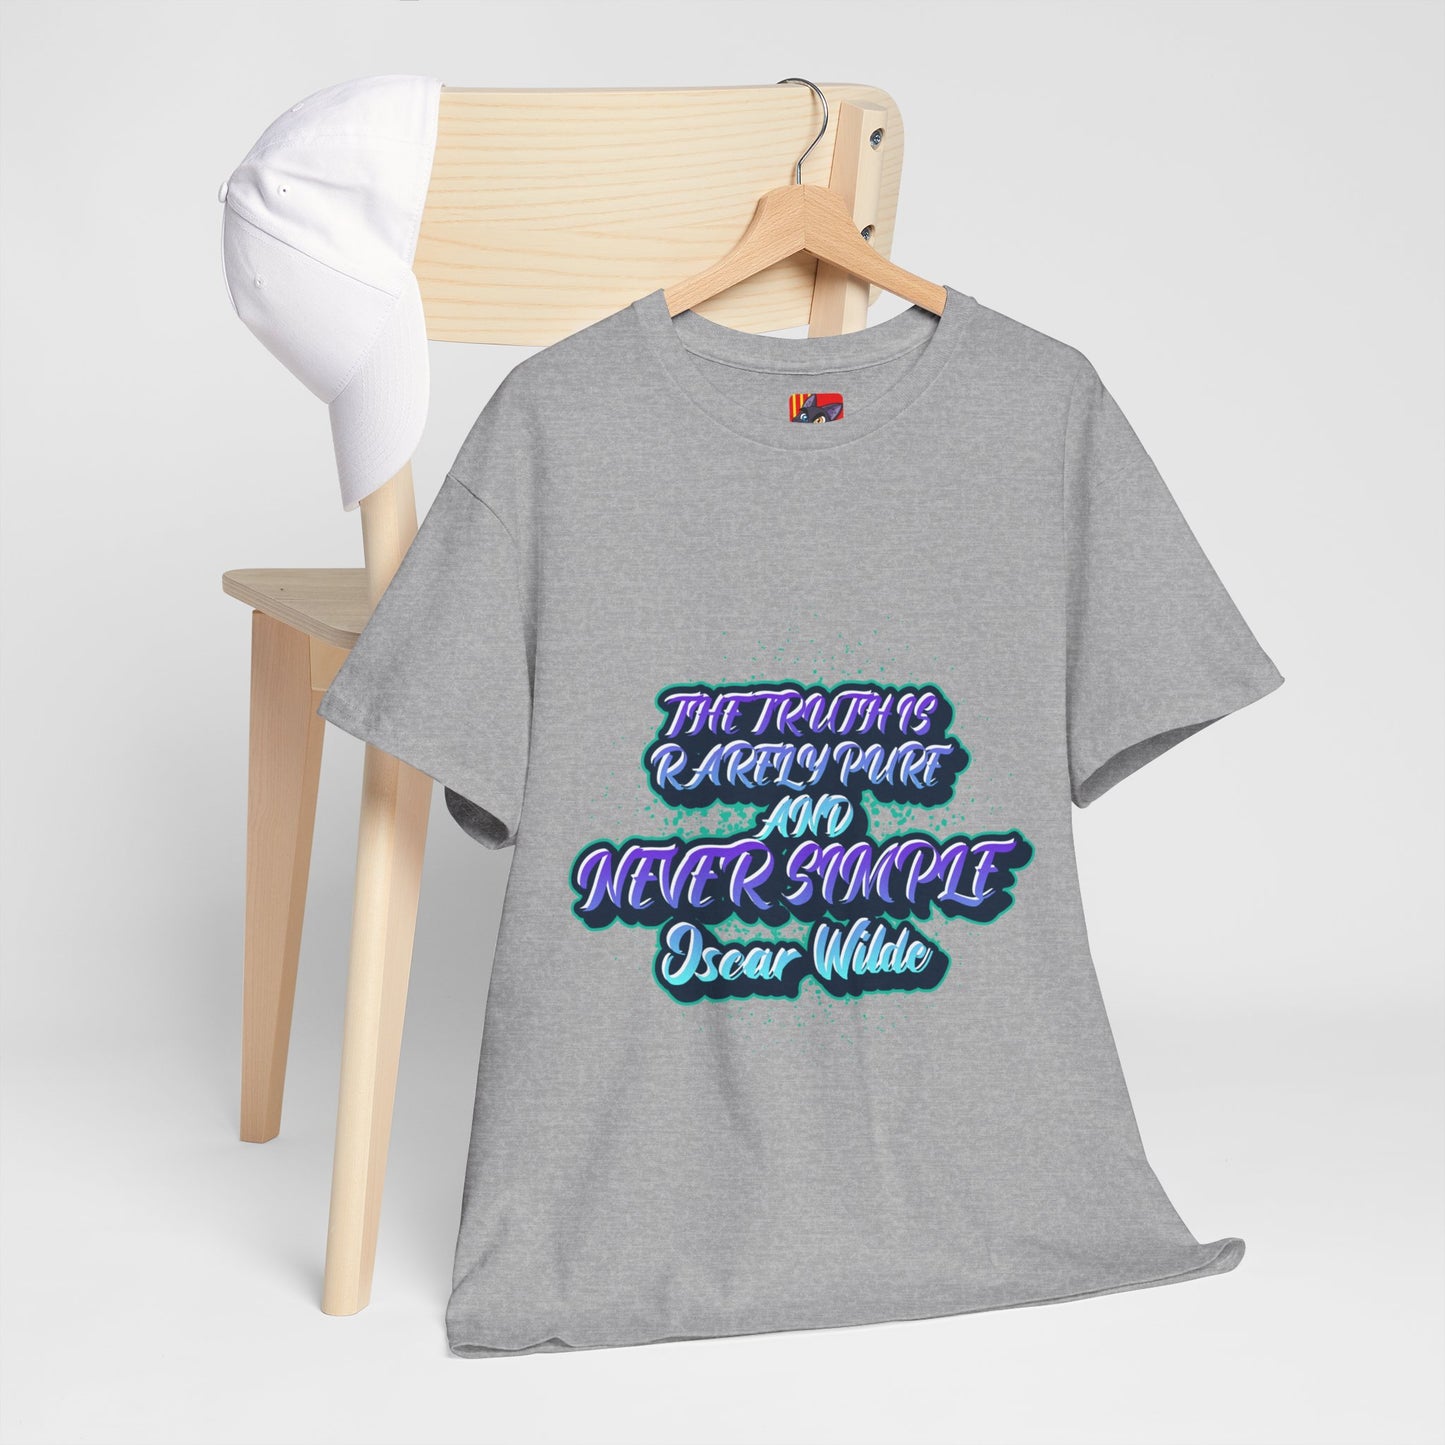 The Opportunity Seeker T-Shirt: The truth is rarely pure and never simple